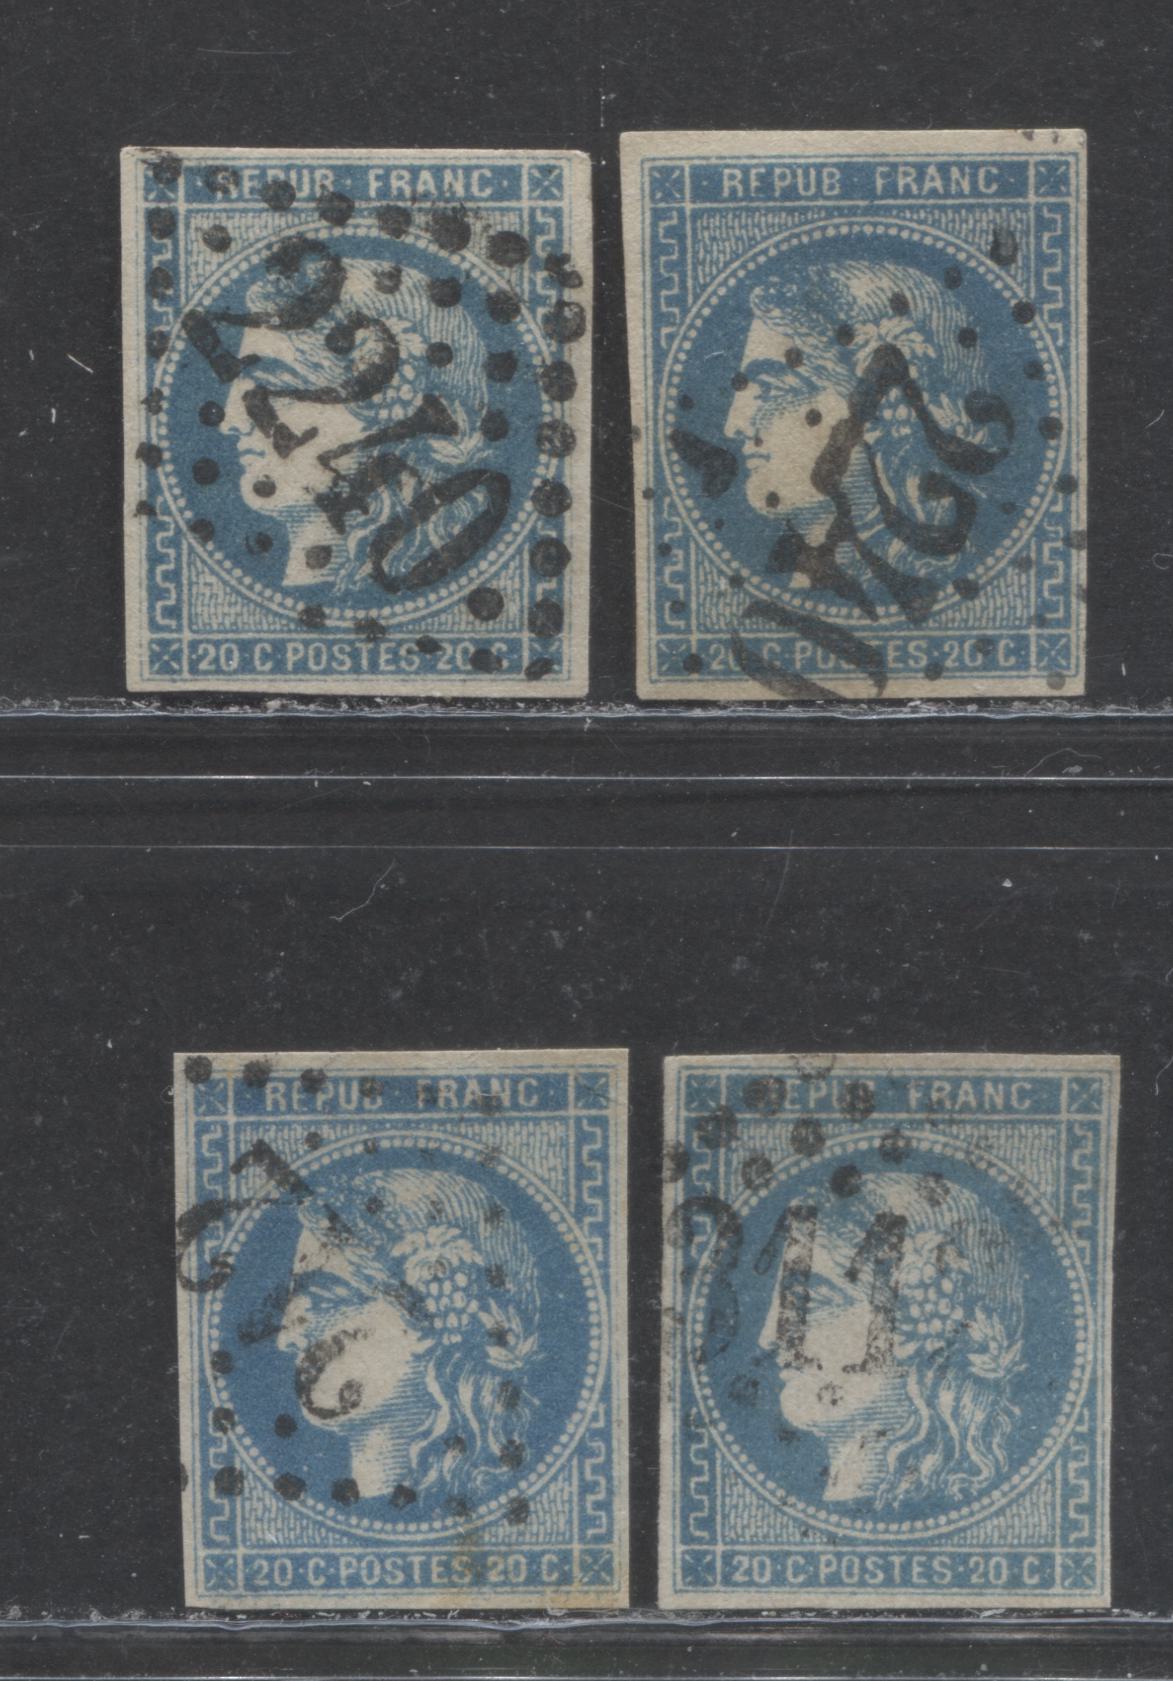 Lot 385 France SC#45 20c Blue, Type 3 1870-1871 Imperf Bordeaux Definitive Issue, Four Fine Used Examples, Different Shades, Papers or Cancels, 2022 Scott Classic Cat. $64 USD, Net Est. $32, Click on Listing to See ALL Pictures